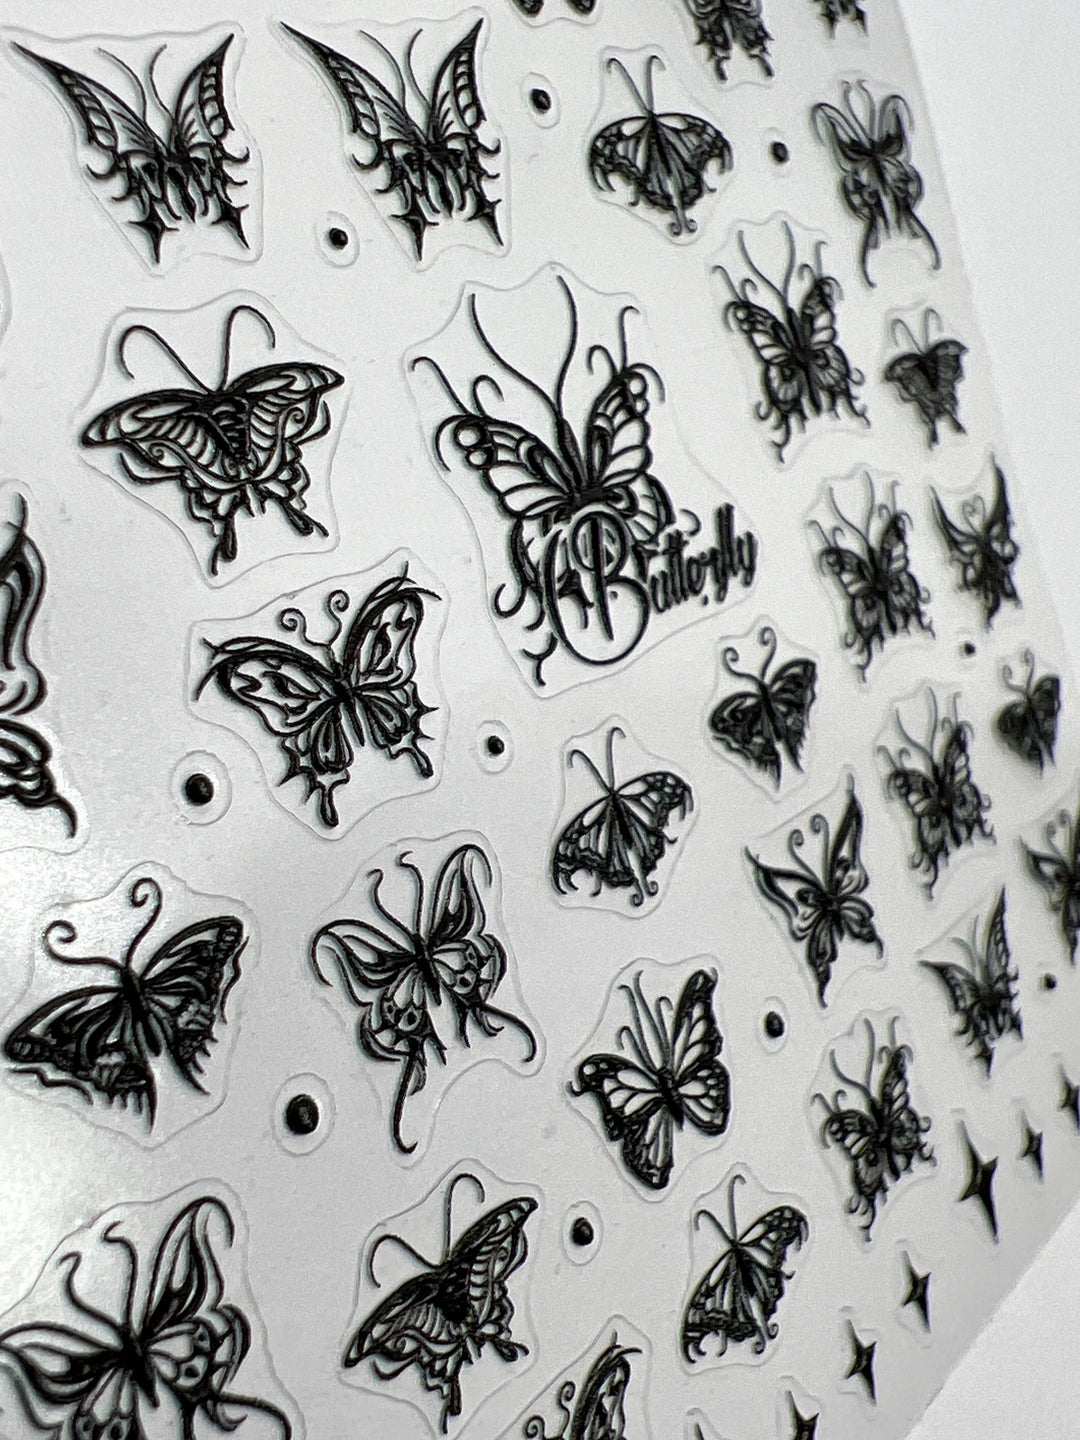 MM-- Tattoo Butterfly Decals